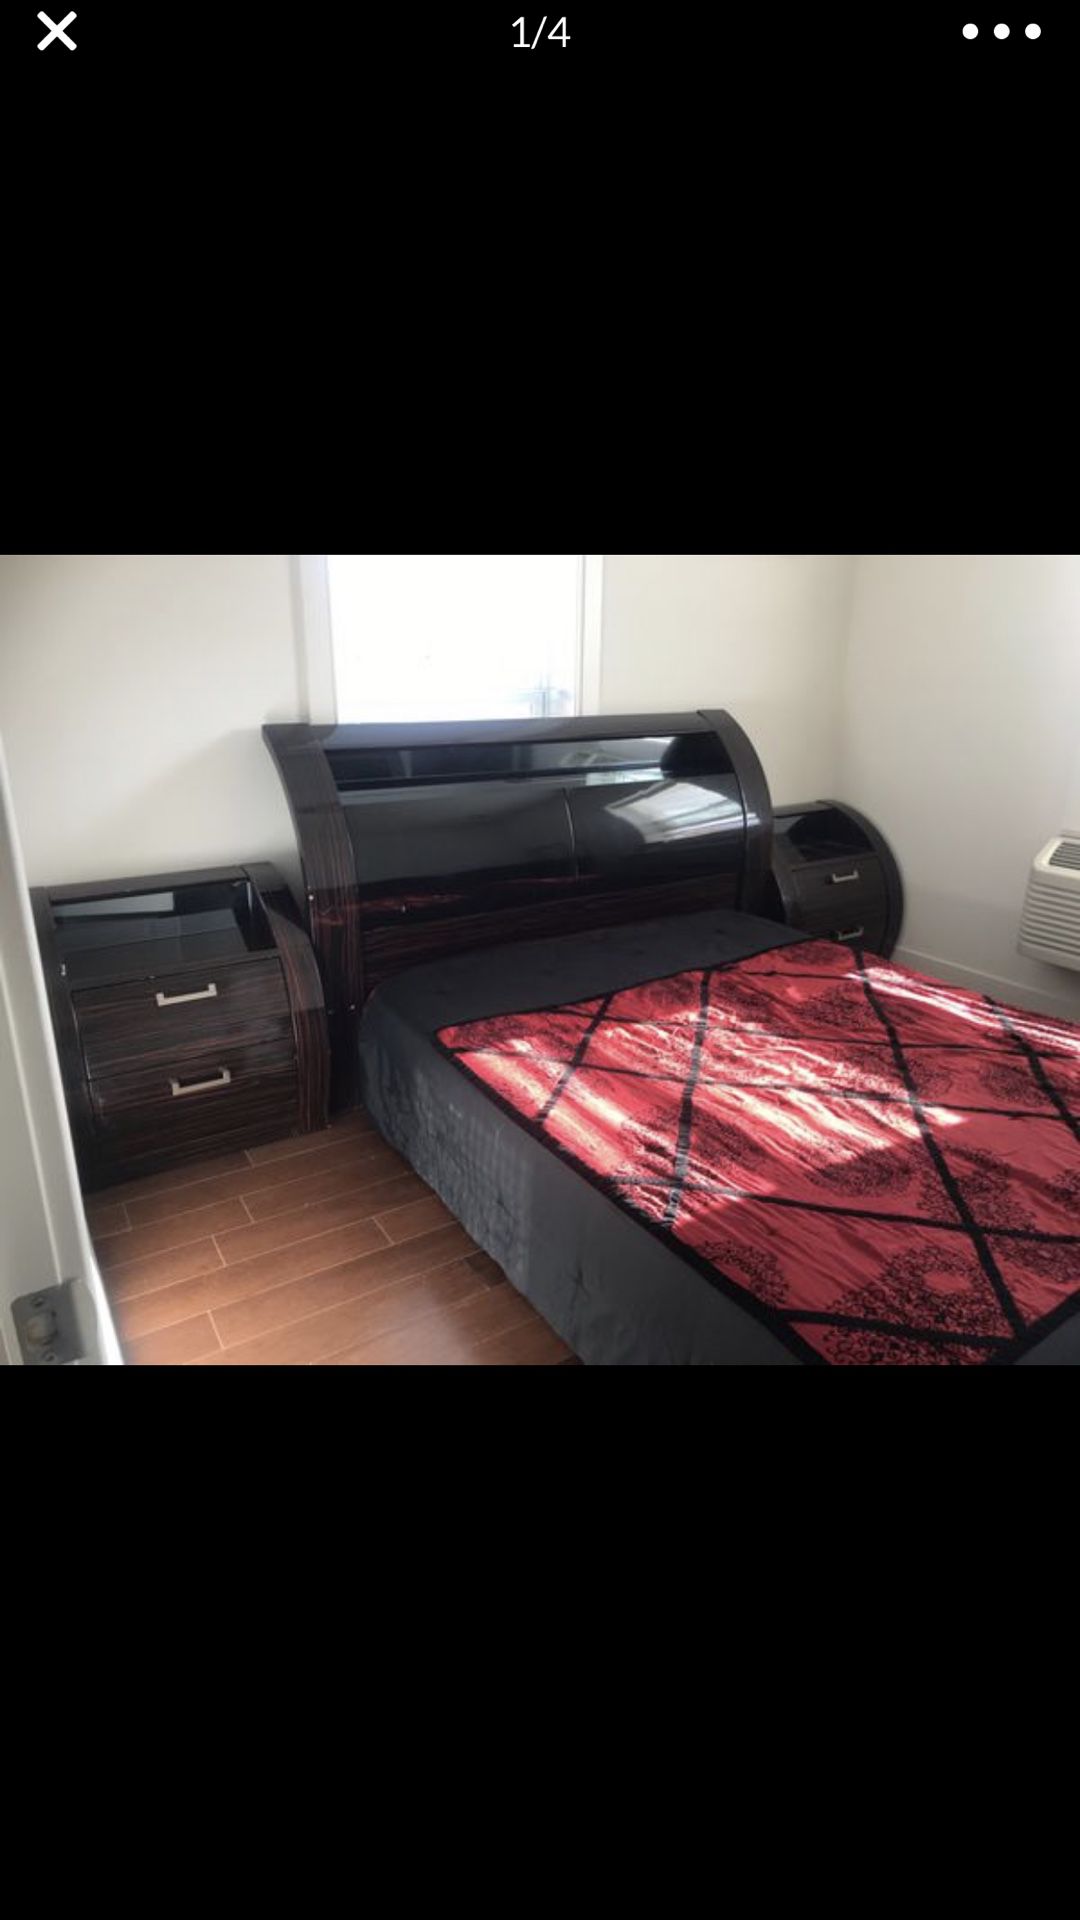 Complete bed set || Tv Stand || 2 drawers || bed frame